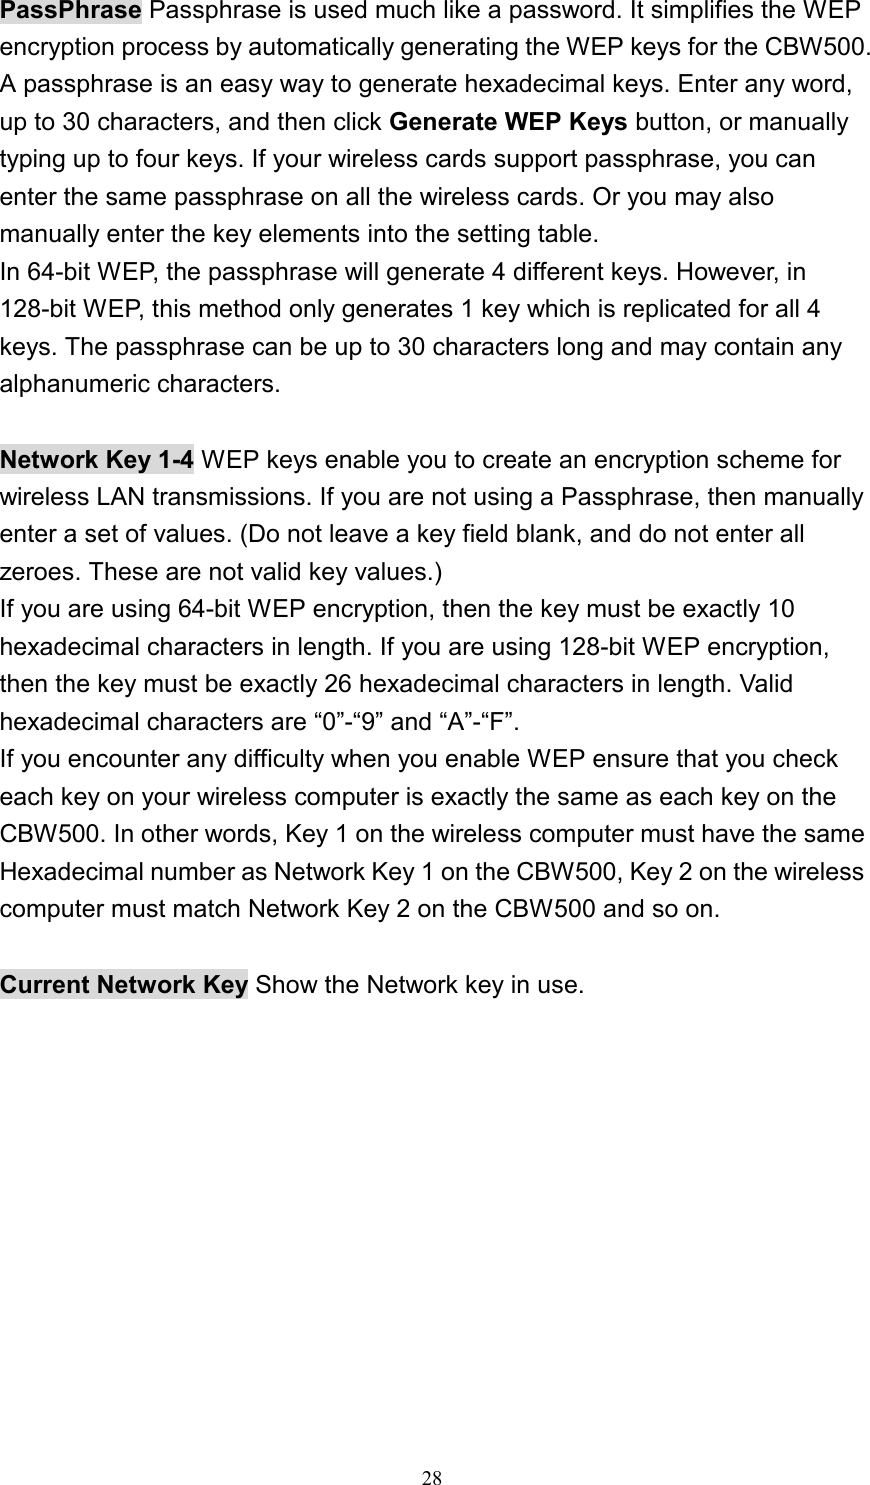 PassPhrase Passphrase is used much like a password. It simplifies the WEP encryption process by automatically generating the WEP keys for the CBW500. A passphrase is an easy way to generate hexadecimal keys. Enter any word, up to 30 characters, and then click Generate WEP Keys button, or manually typing up to four keys. If your wireless cards support passphrase, you can enter the same passphrase on all the wireless cards. Or you may also manually enter the key elements into the setting table. In 64-bit WEP, the passphrase will generate 4 different keys. However, in 128-bit WEP, this method only generates 1 key which is replicated for all 4 keys. The passphrase can be up to 30 characters long and may contain any alphanumeric characters.  Network Key 1-4 WEP keys enable you to create an encryption scheme for wireless LAN transmissions. If you are not using a Passphrase, then manually enter a set of values. (Do not leave a key field blank, and do not enter all zeroes. These are not valid key values.) If you are using 64-bit WEP encryption, then the key must be exactly 10 hexadecimal characters in length. If you are using 128-bit WEP encryption, then the key must be exactly 26 hexadecimal characters in length. Valid hexadecimal characters are “0”-“9” and “A”-“F”. If you encounter any difficulty when you enable WEP ensure that you check each key on your wireless computer is exactly the same as each key on the CBW500. In other words, Key 1 on the wireless computer must have the same Hexadecimal number as Network Key 1 on the CBW500, Key 2 on the wireless computer must match Network Key 2 on the CBW500 and so on.  Current Network Key Show the Network key in use.   28